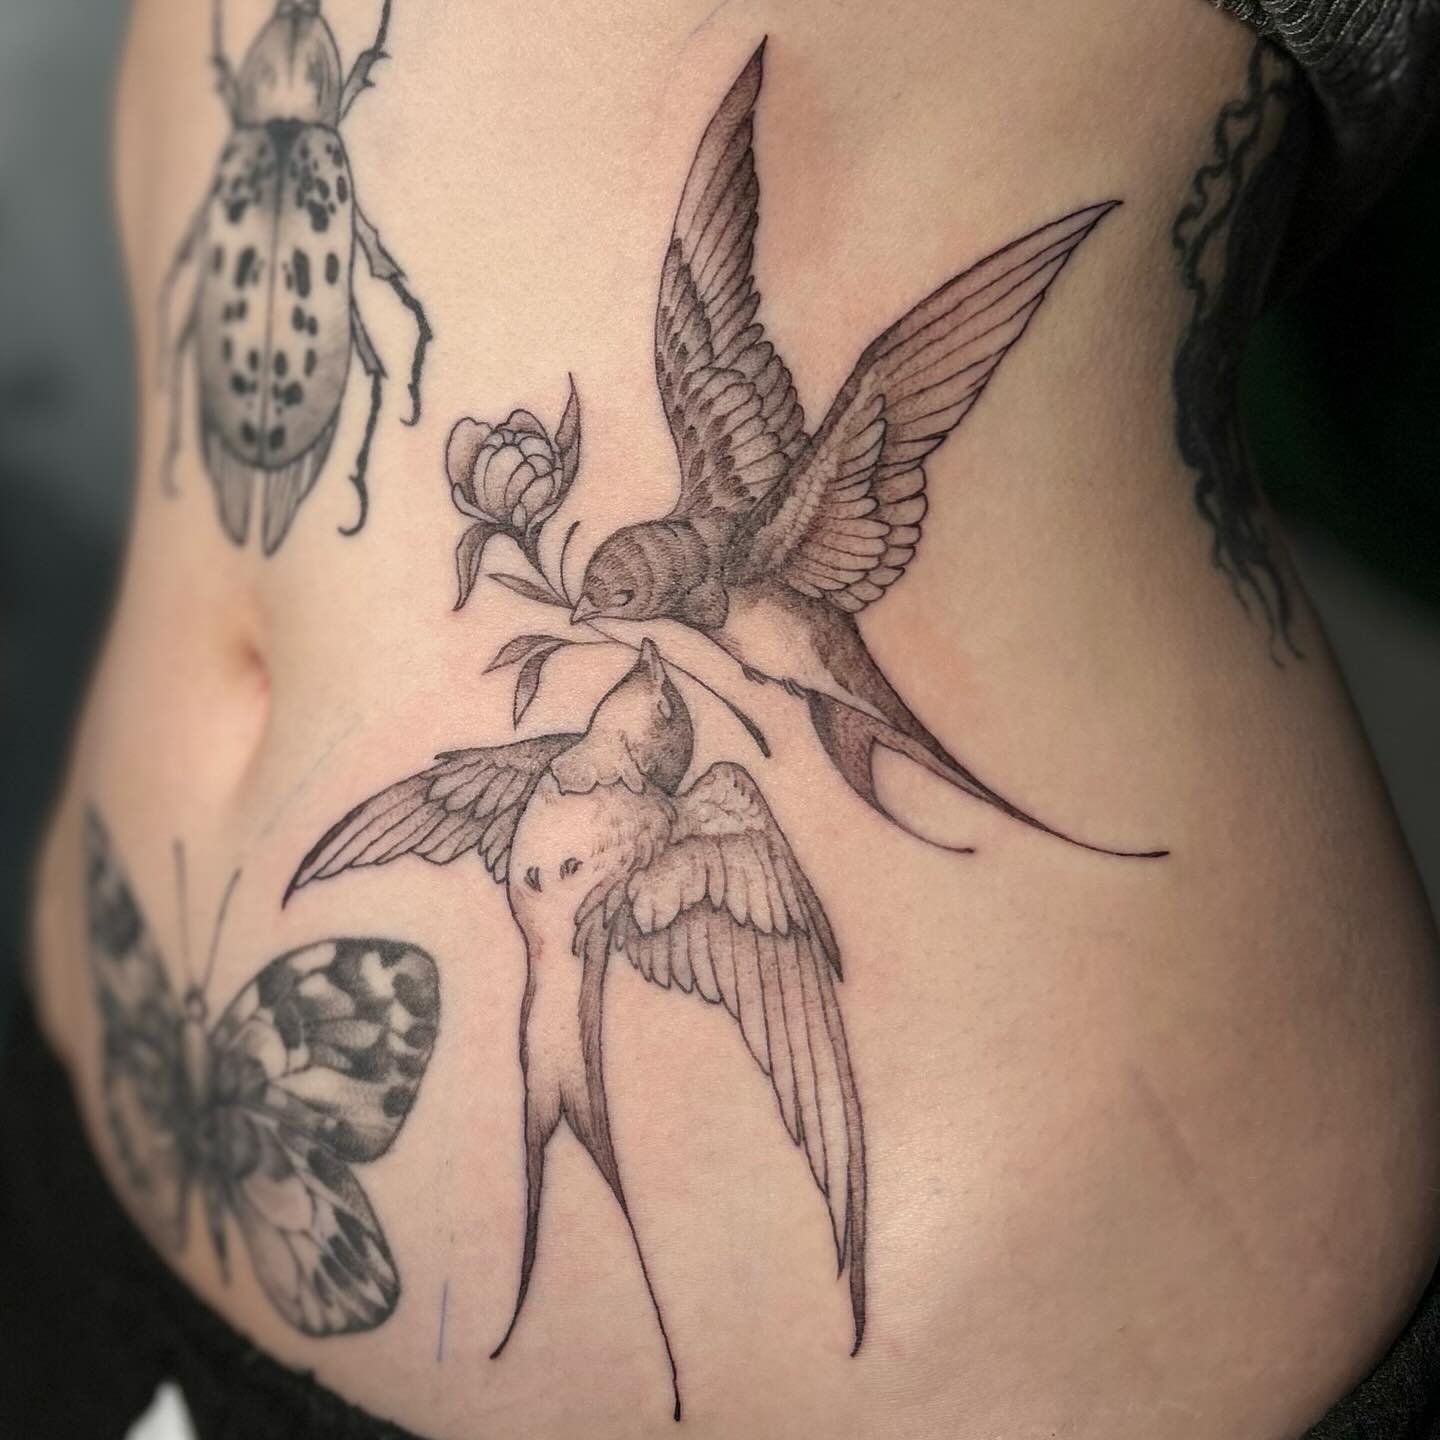 Love this placement for this flash piece 😍 thanks for adding these lover birds to your collection 💛💛💛

#stomachtattoo #swallowstattoo #blackandgreytattoo #birdtattoo #calgarytattoo